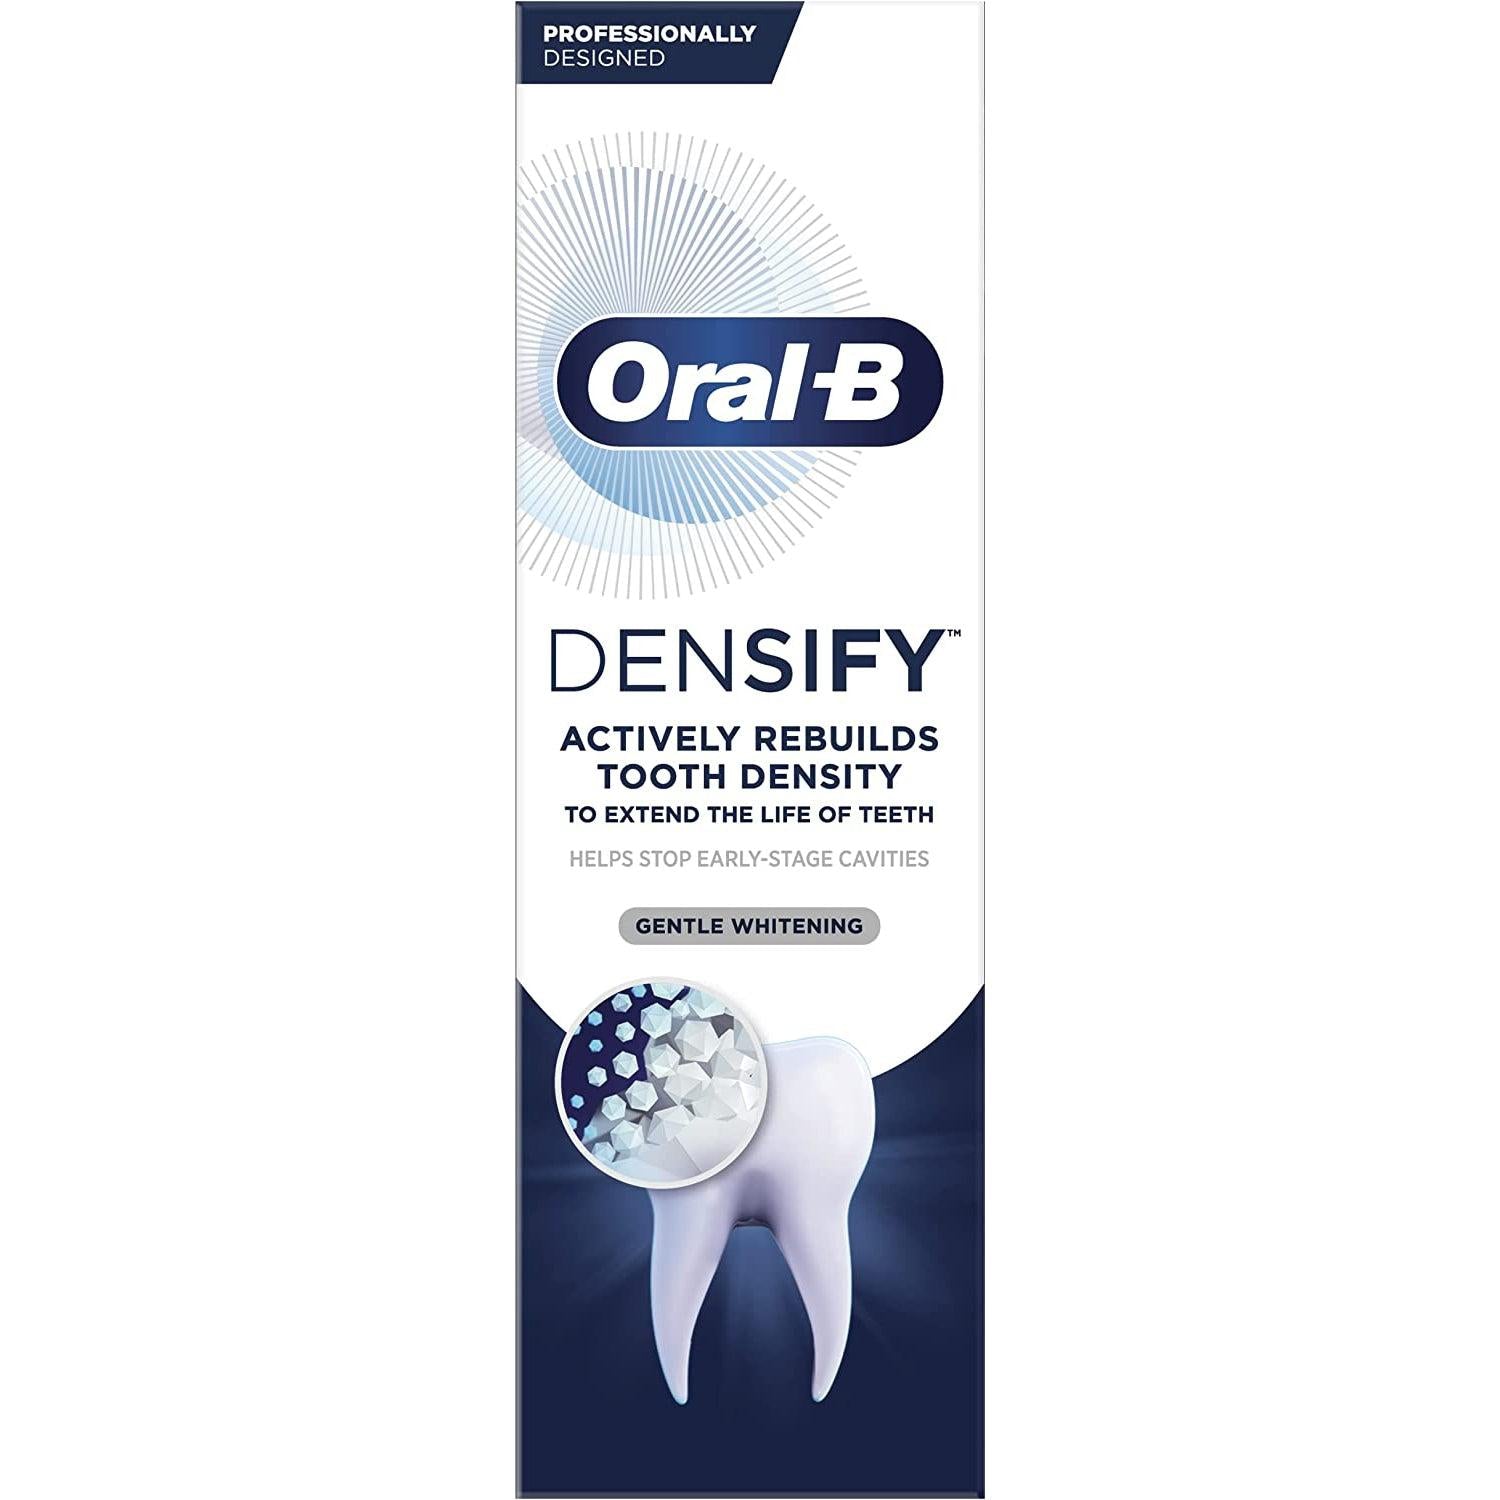 Oral-B Densify Gentle Whitening Toothpaste75ml - Rebuilds Tooth Density - Healthxpress.ie